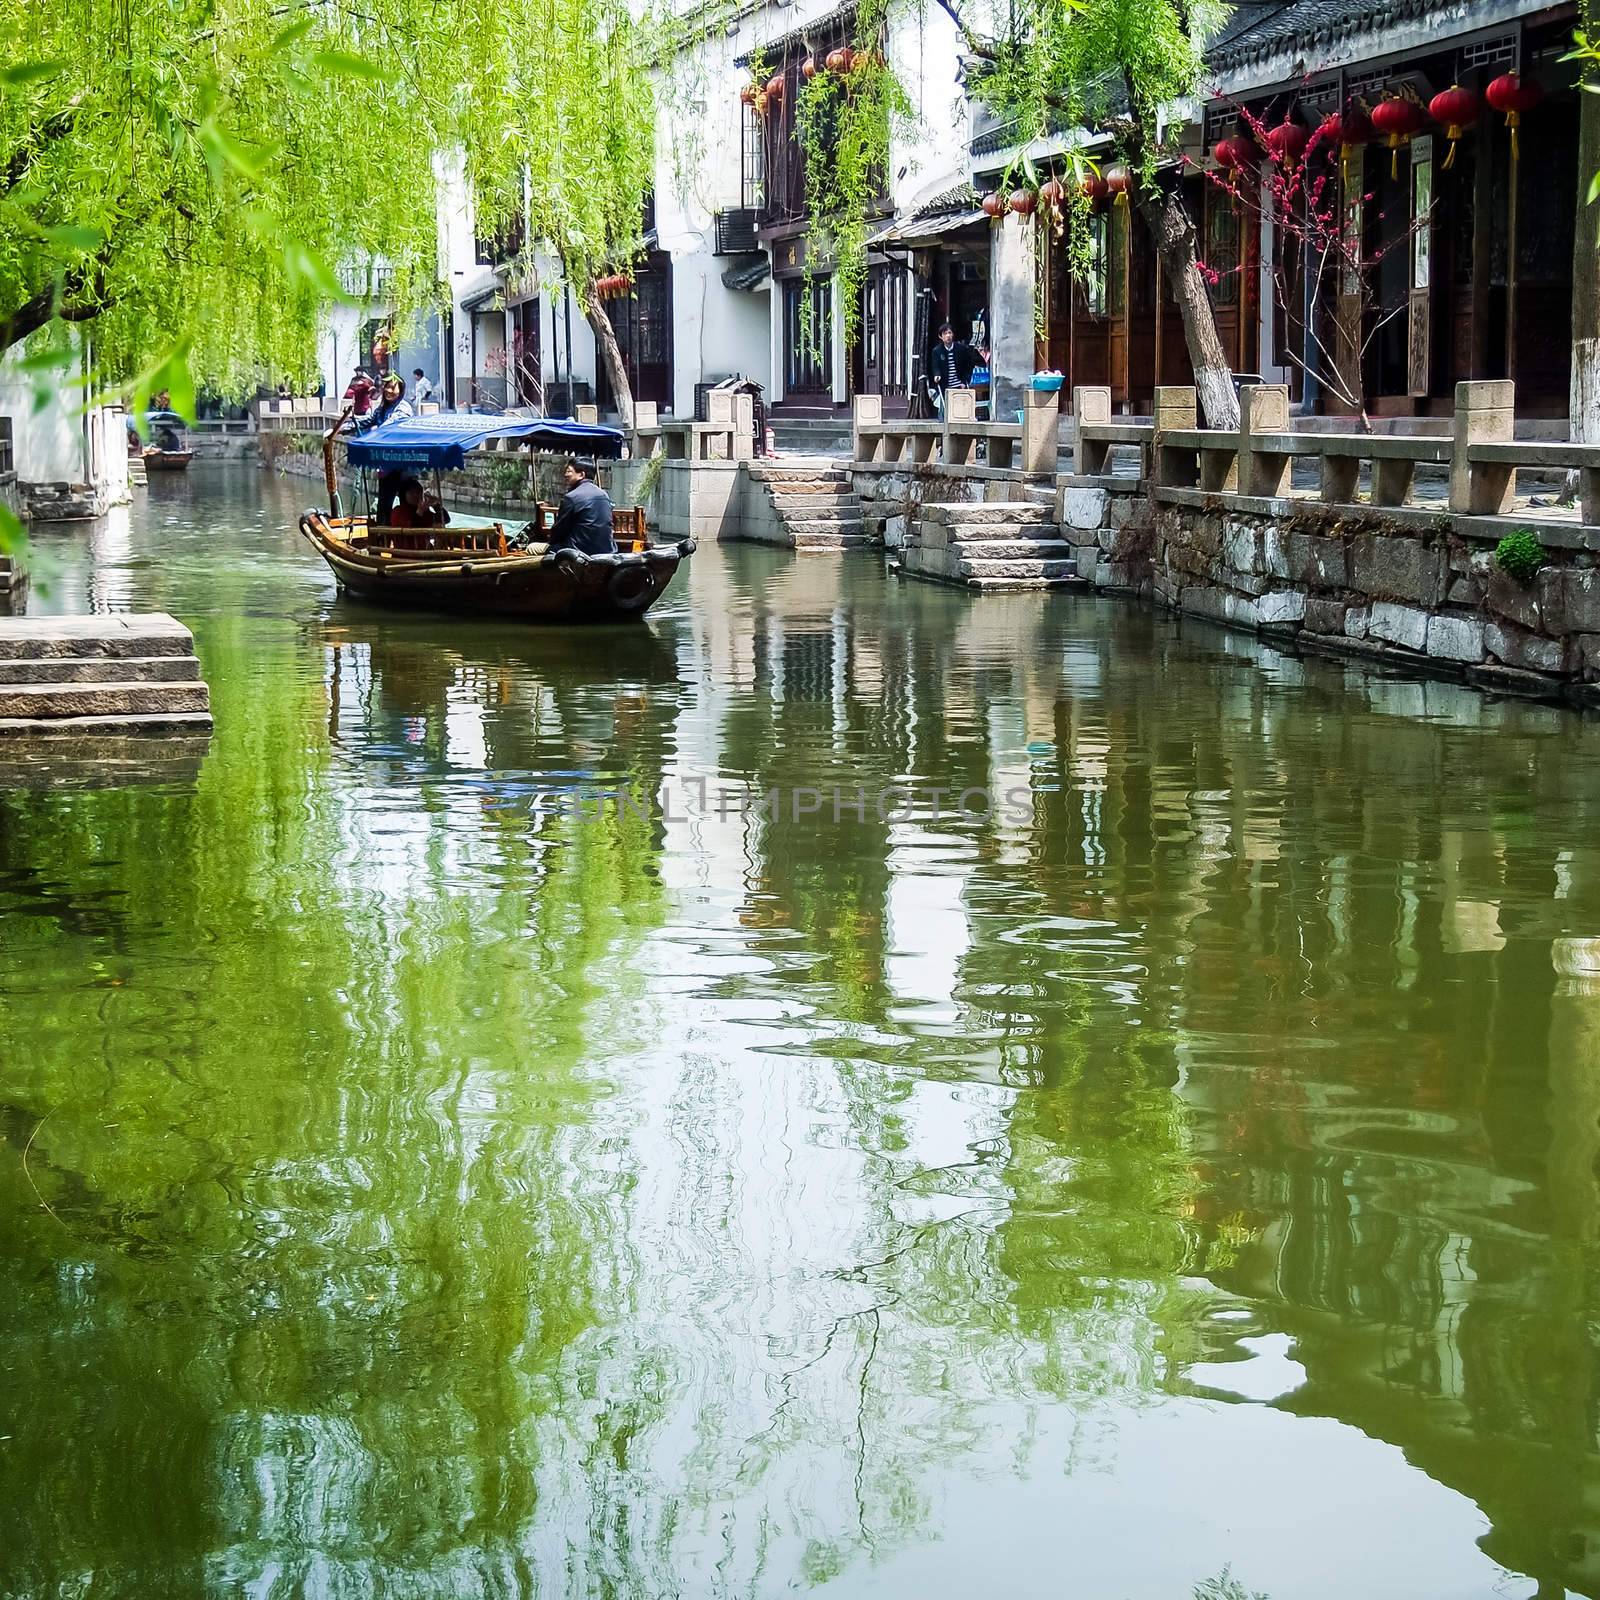 ZHOUZHUANG, SHANGHAI - April 11, 2011 : Zhouzhuang, the ancient water village is Shanghai tourist attraction with 1,000,000 visitors per year and there are a lot of variety activities have done here.